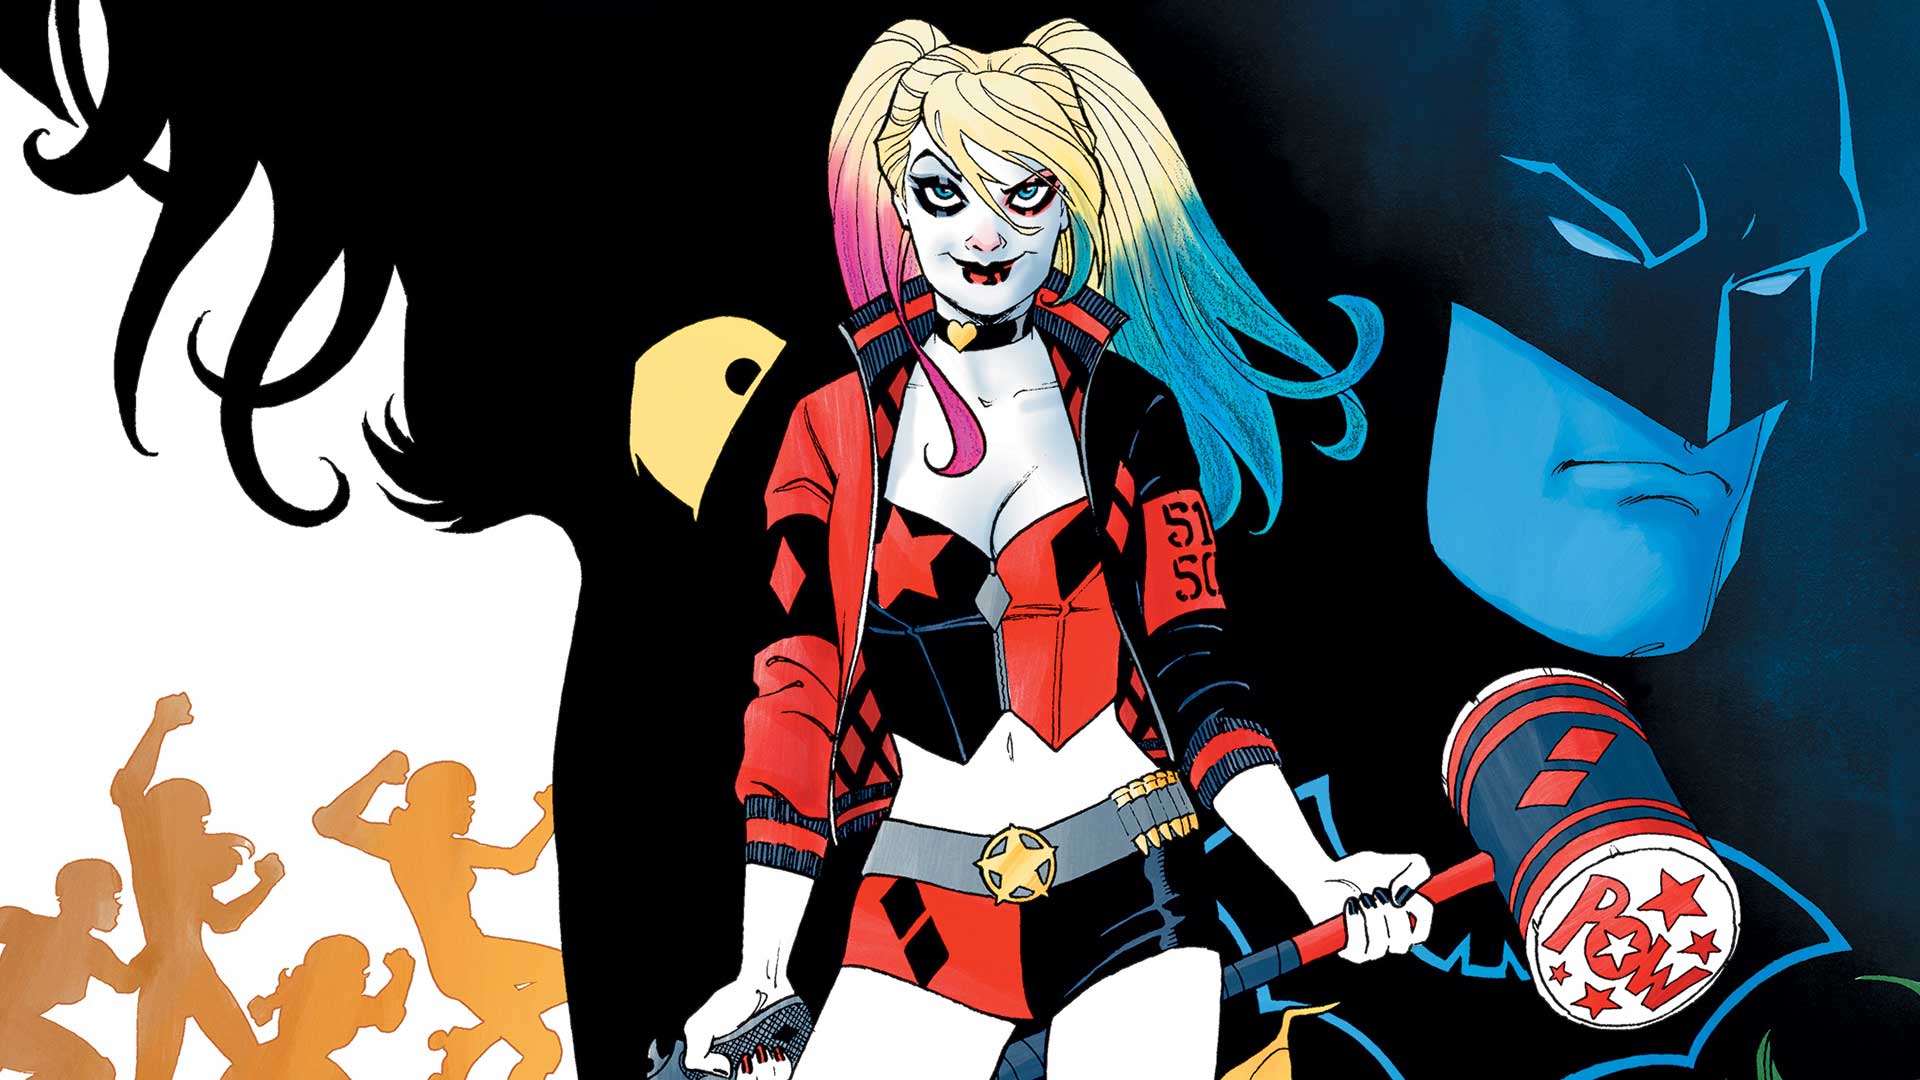 cj mclaughlin recommends harley quinn double butt crack pic